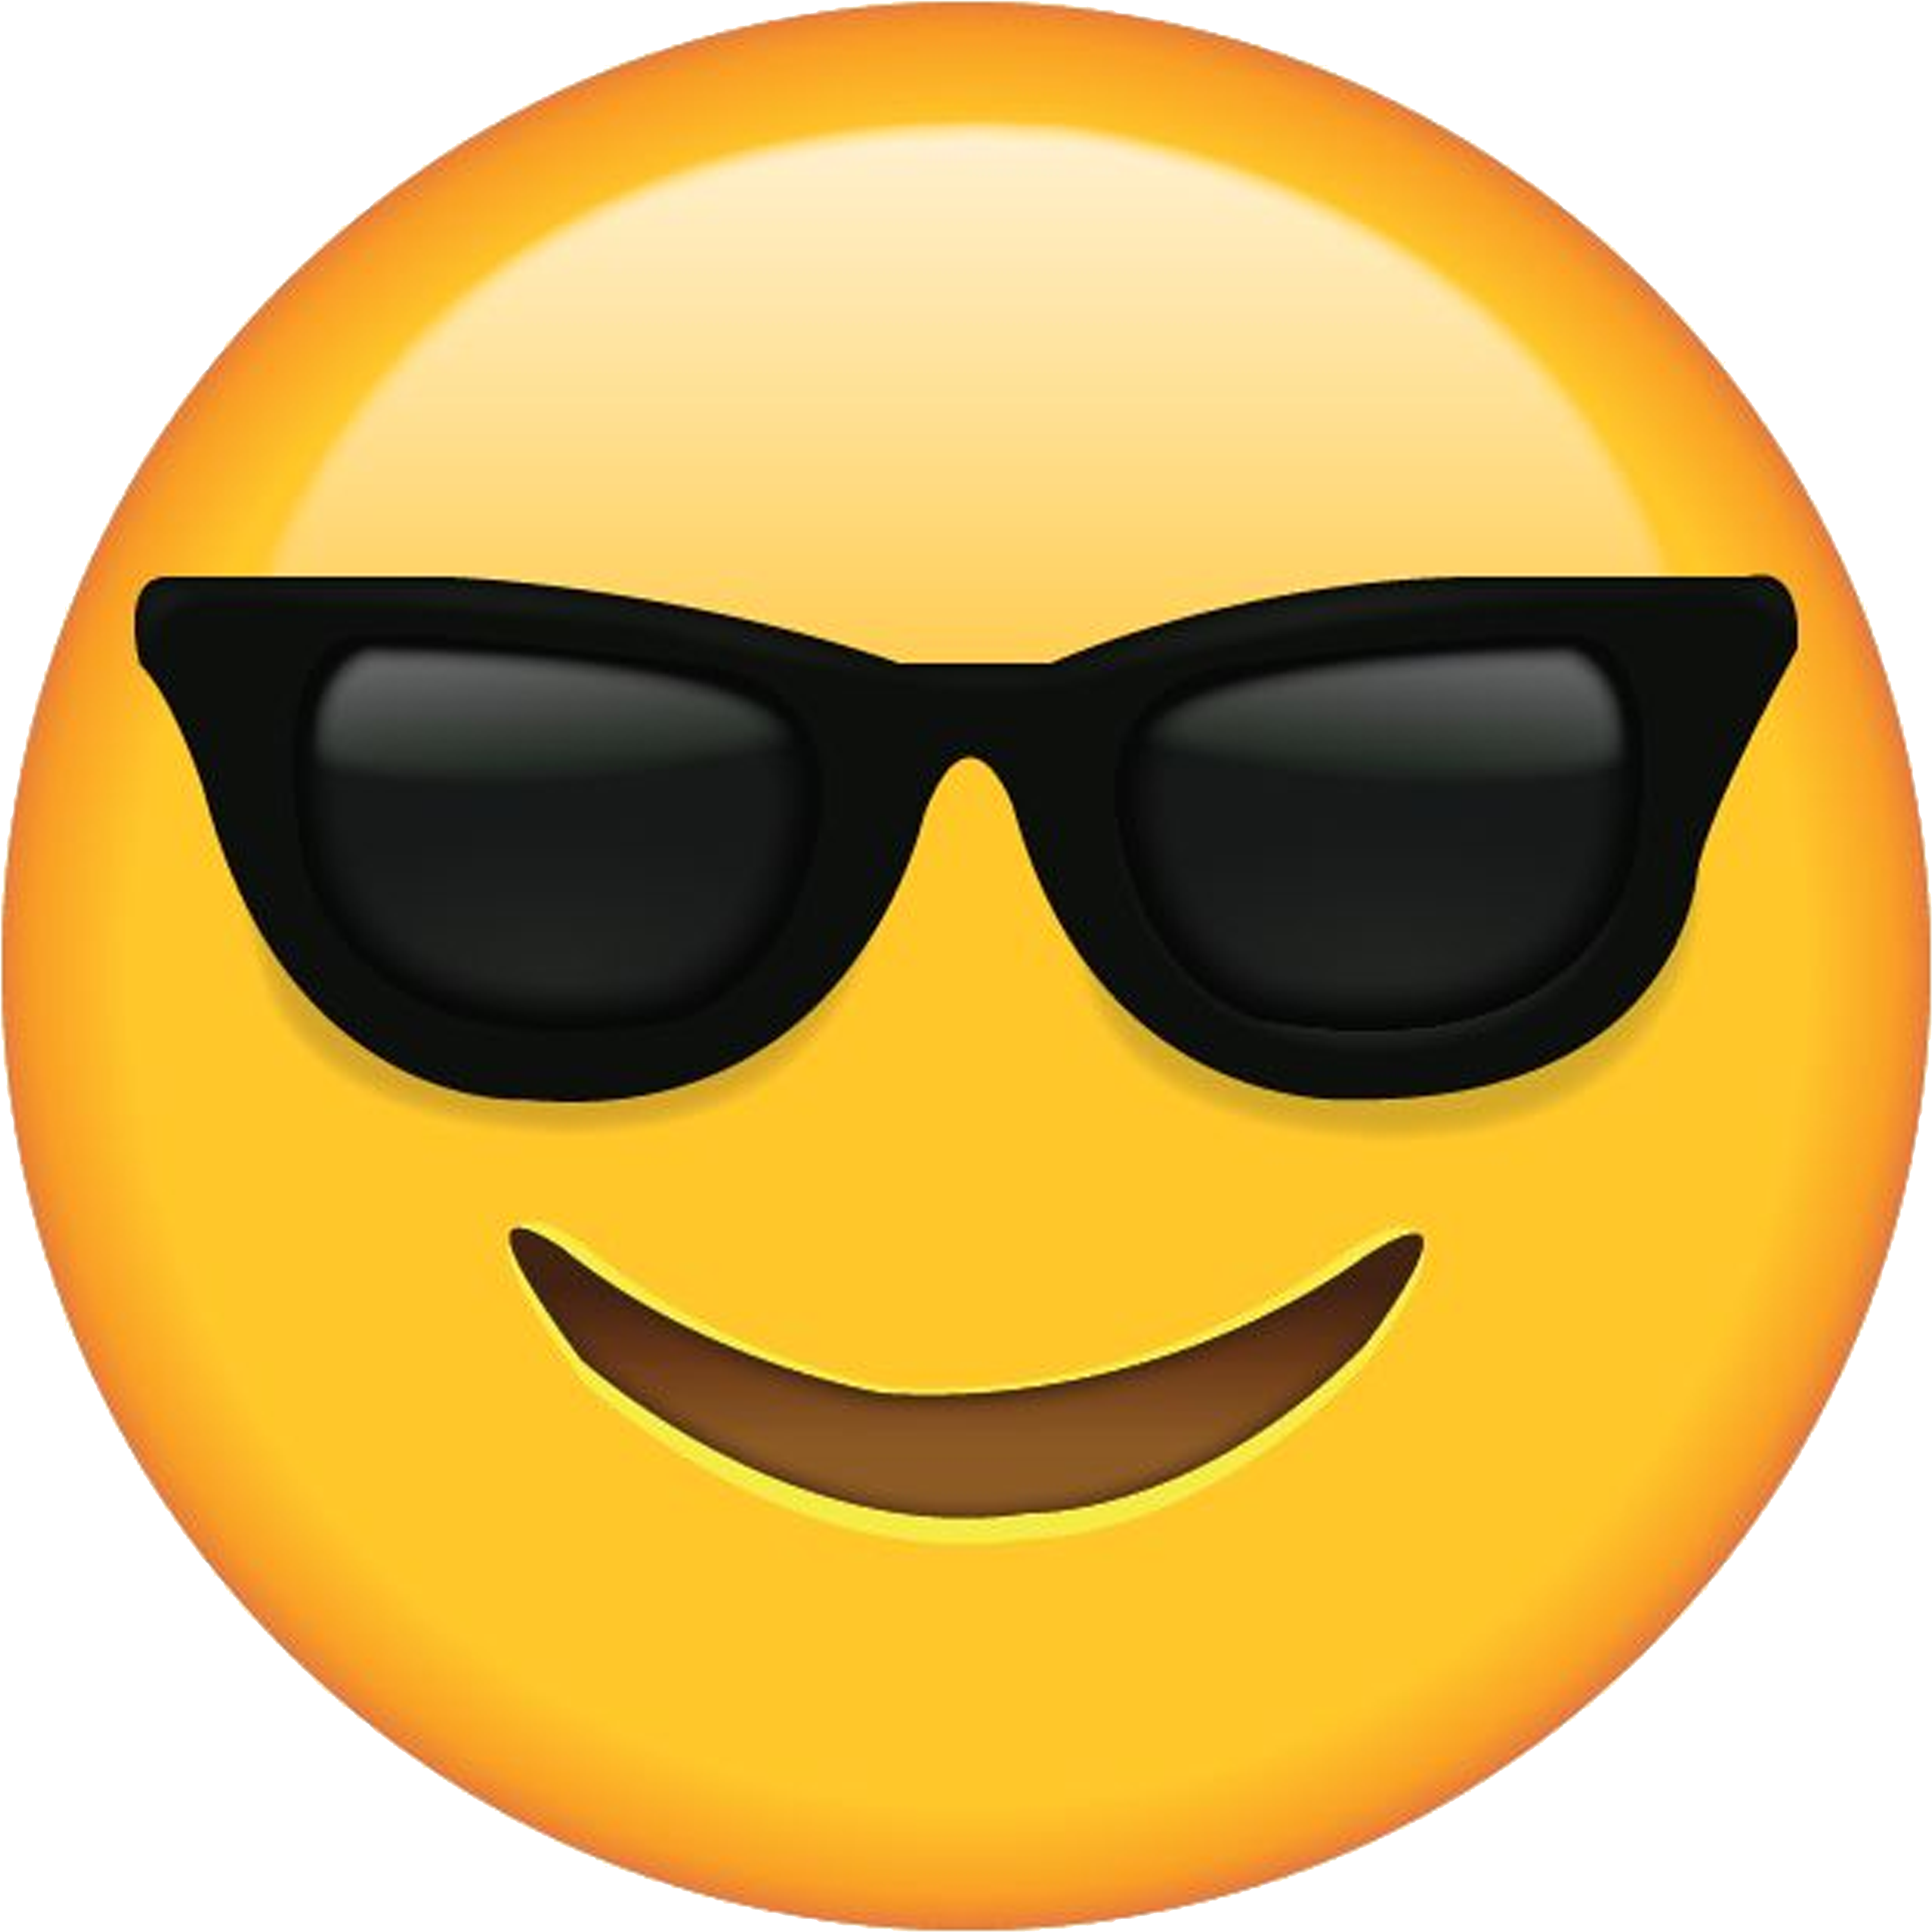 Smiling Face With Sunglasses Emoji PNG image